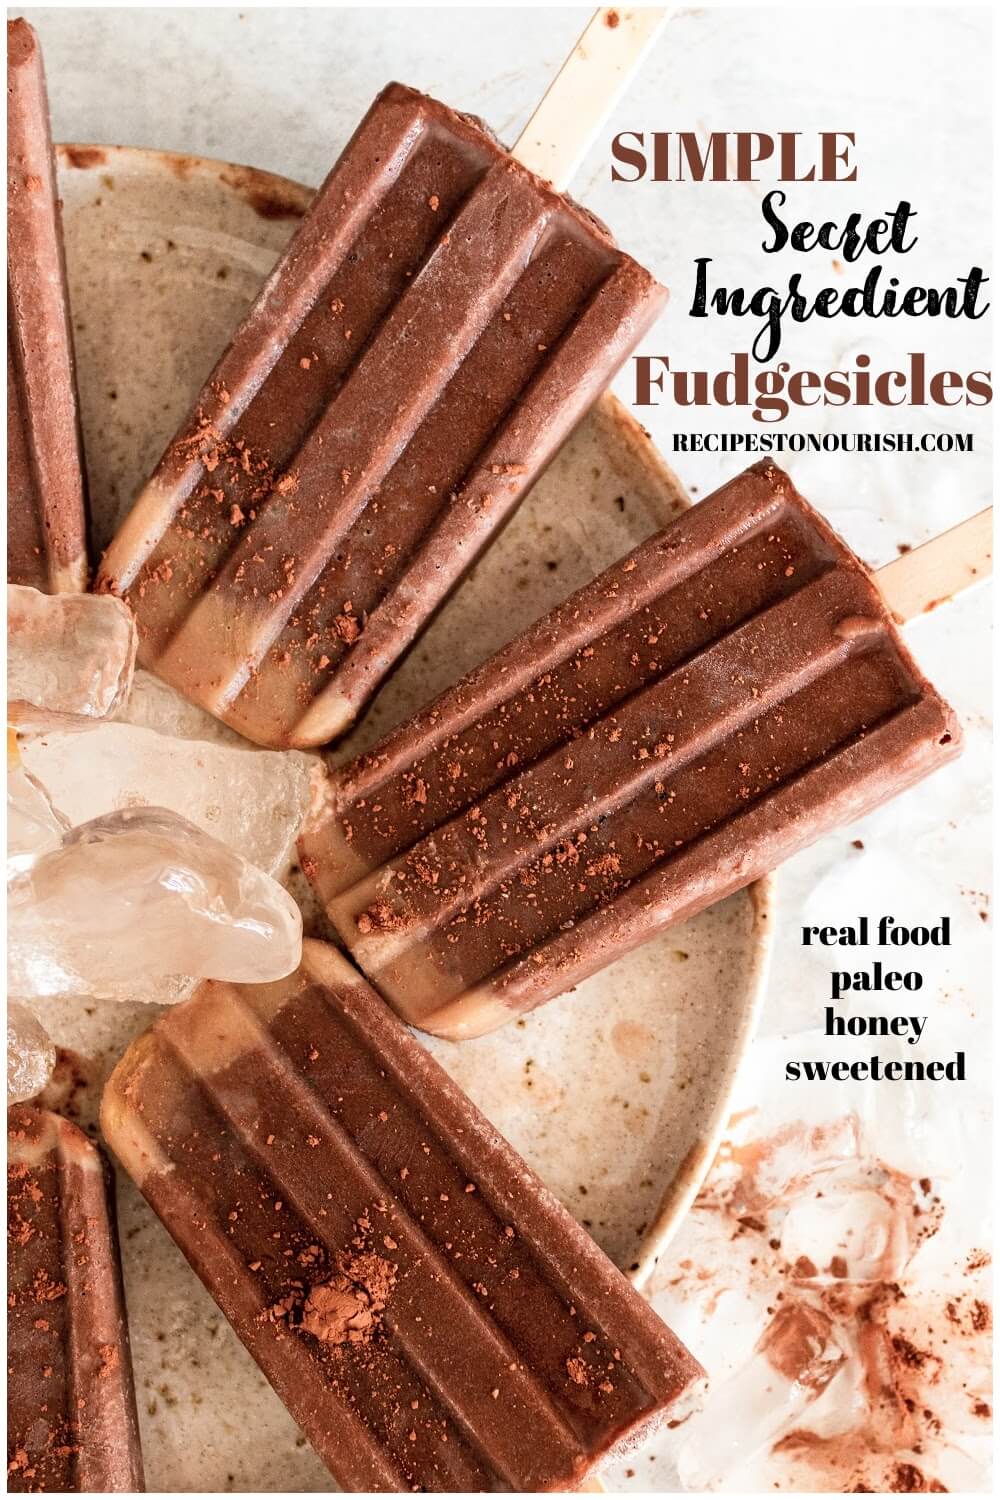 Fudgesicle popsicles dusted with cocoa powder sitting on a plate with ice, with the text Simple Secret Ingredient Fudgesicles, real food, paleo, honey sweetened.